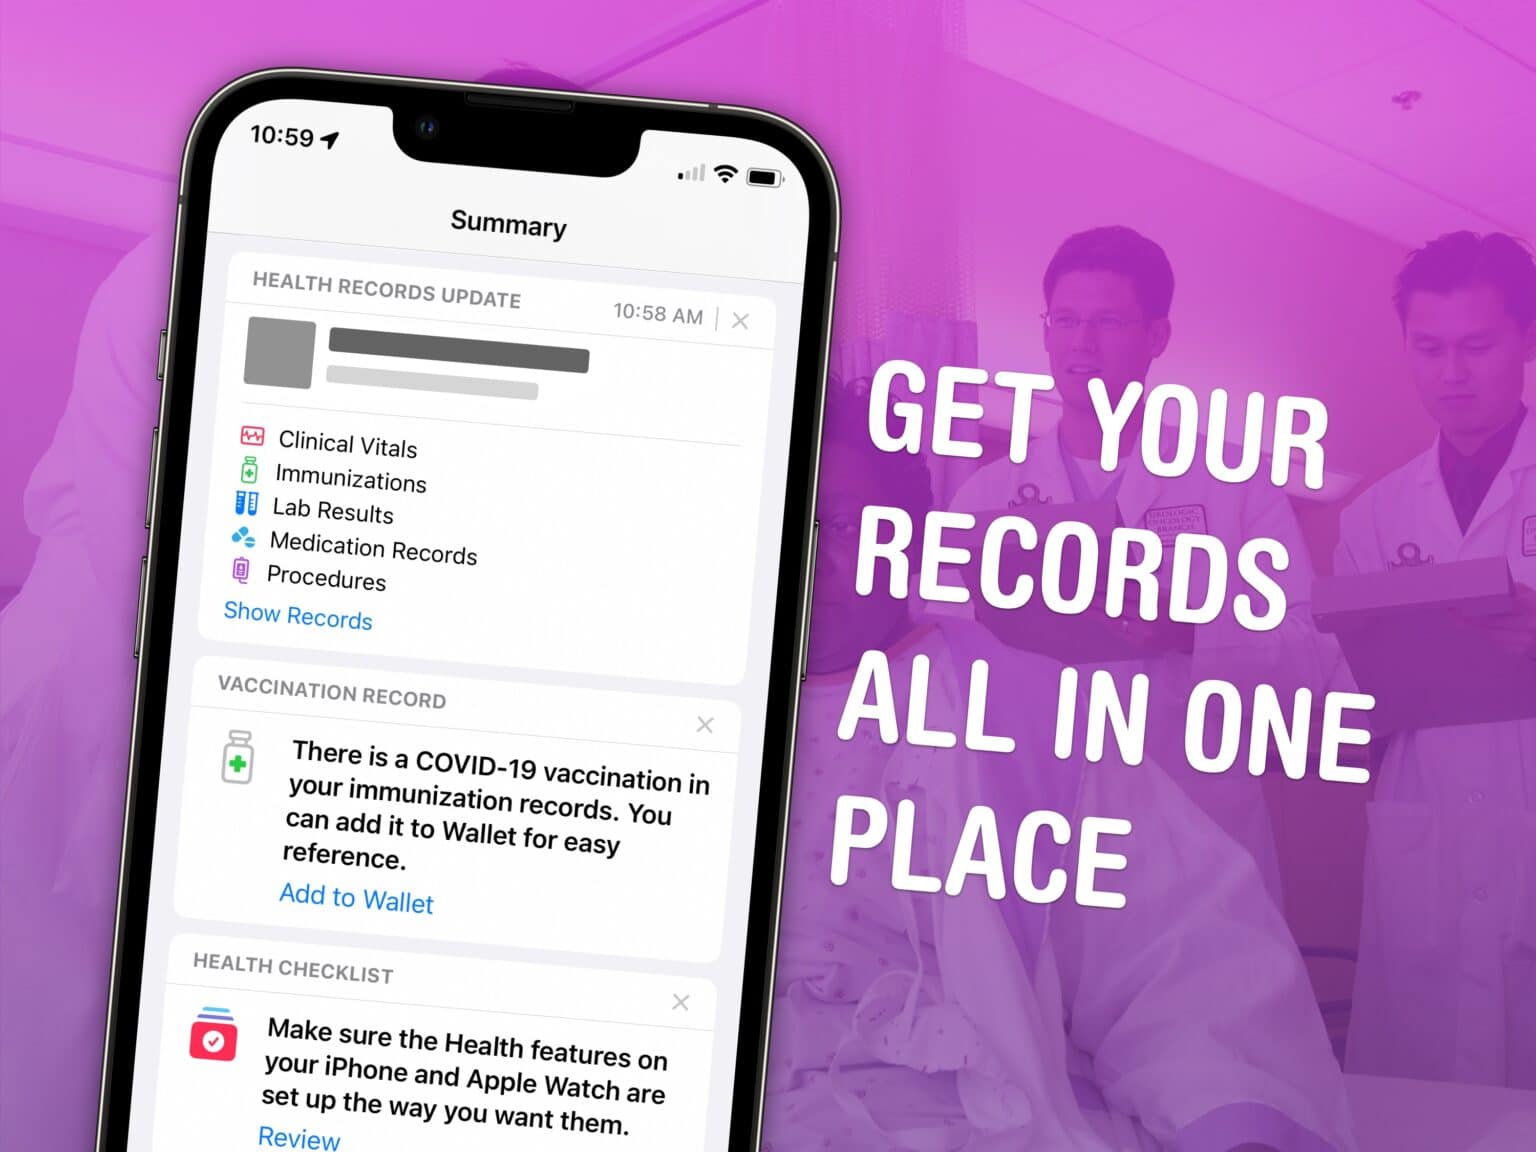 Get your records all in one place